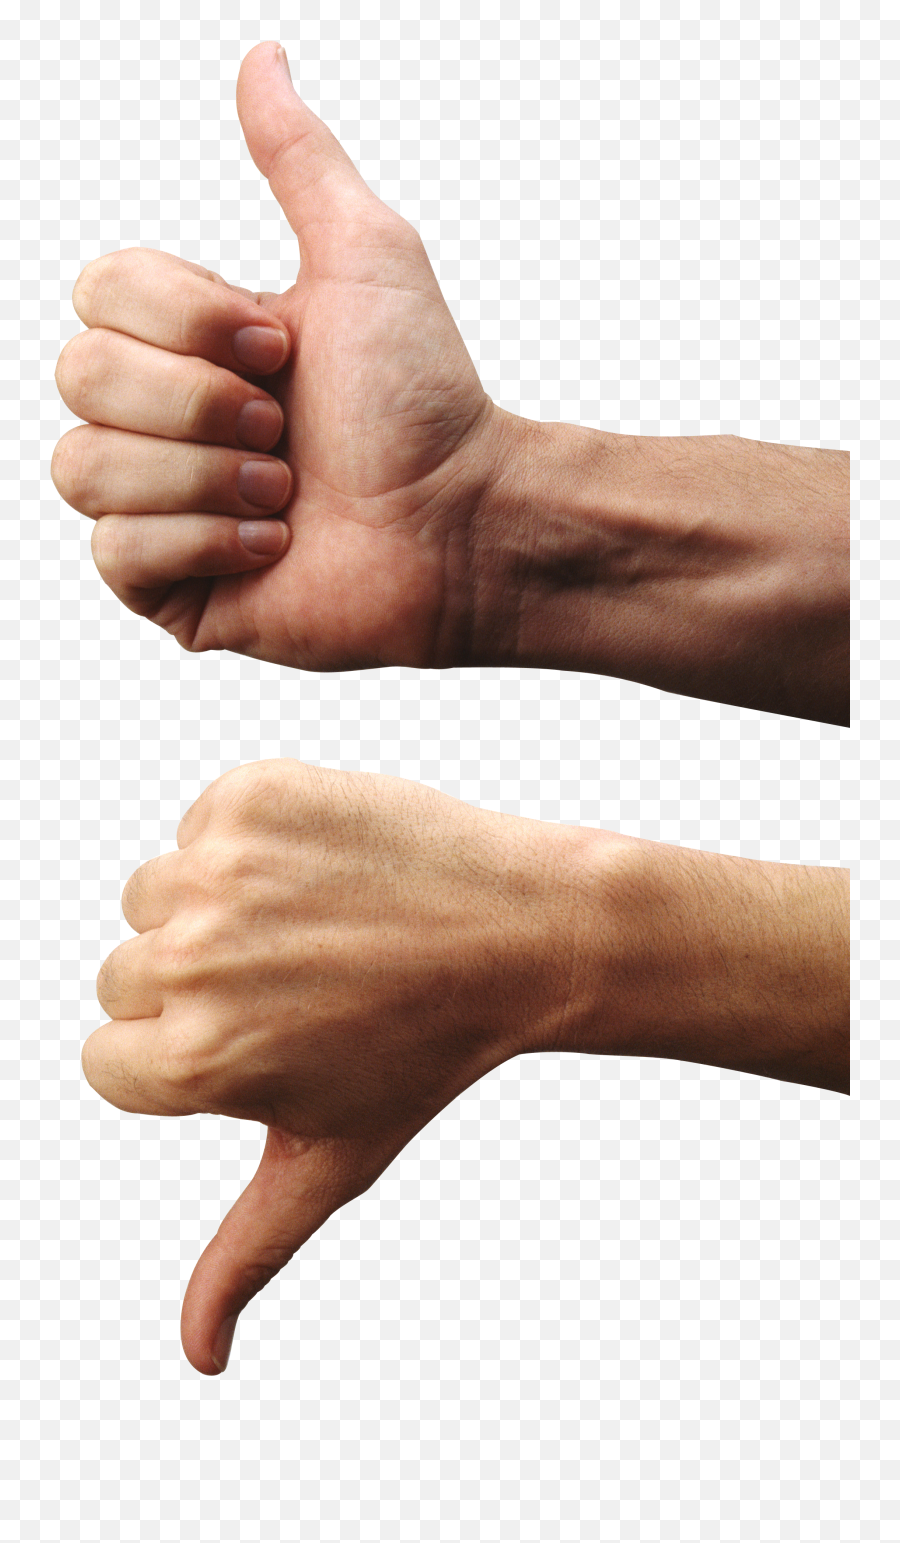 Thumbs Up Down Hand Png Hd U2013 Png Lux - Hand Transparent Background Thumbs Up Png Emoji,Thumbs Up Thumbs Down Emojis